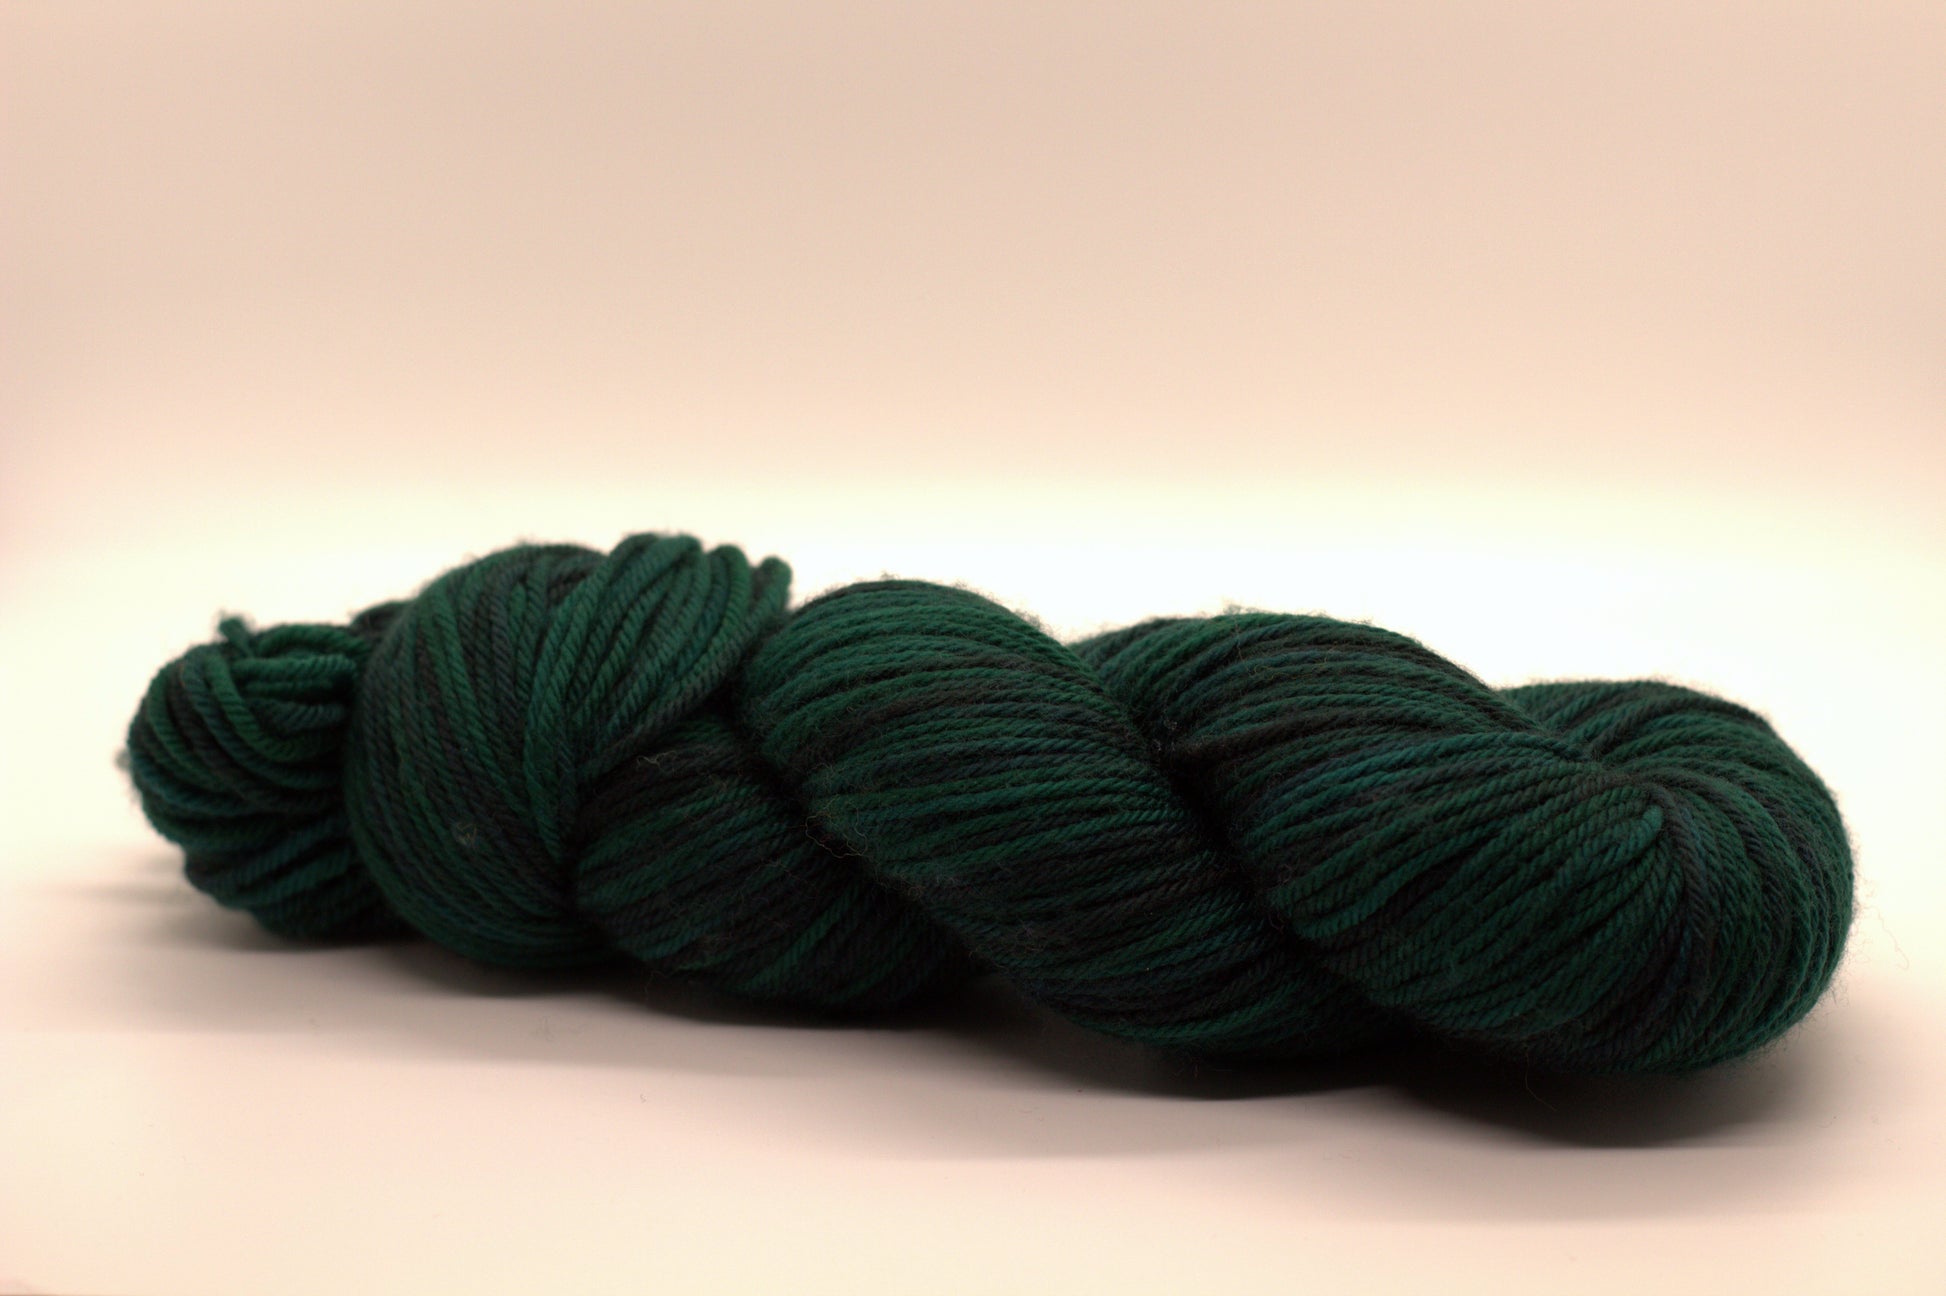 side view of variegated dark green and black yarn on white background.